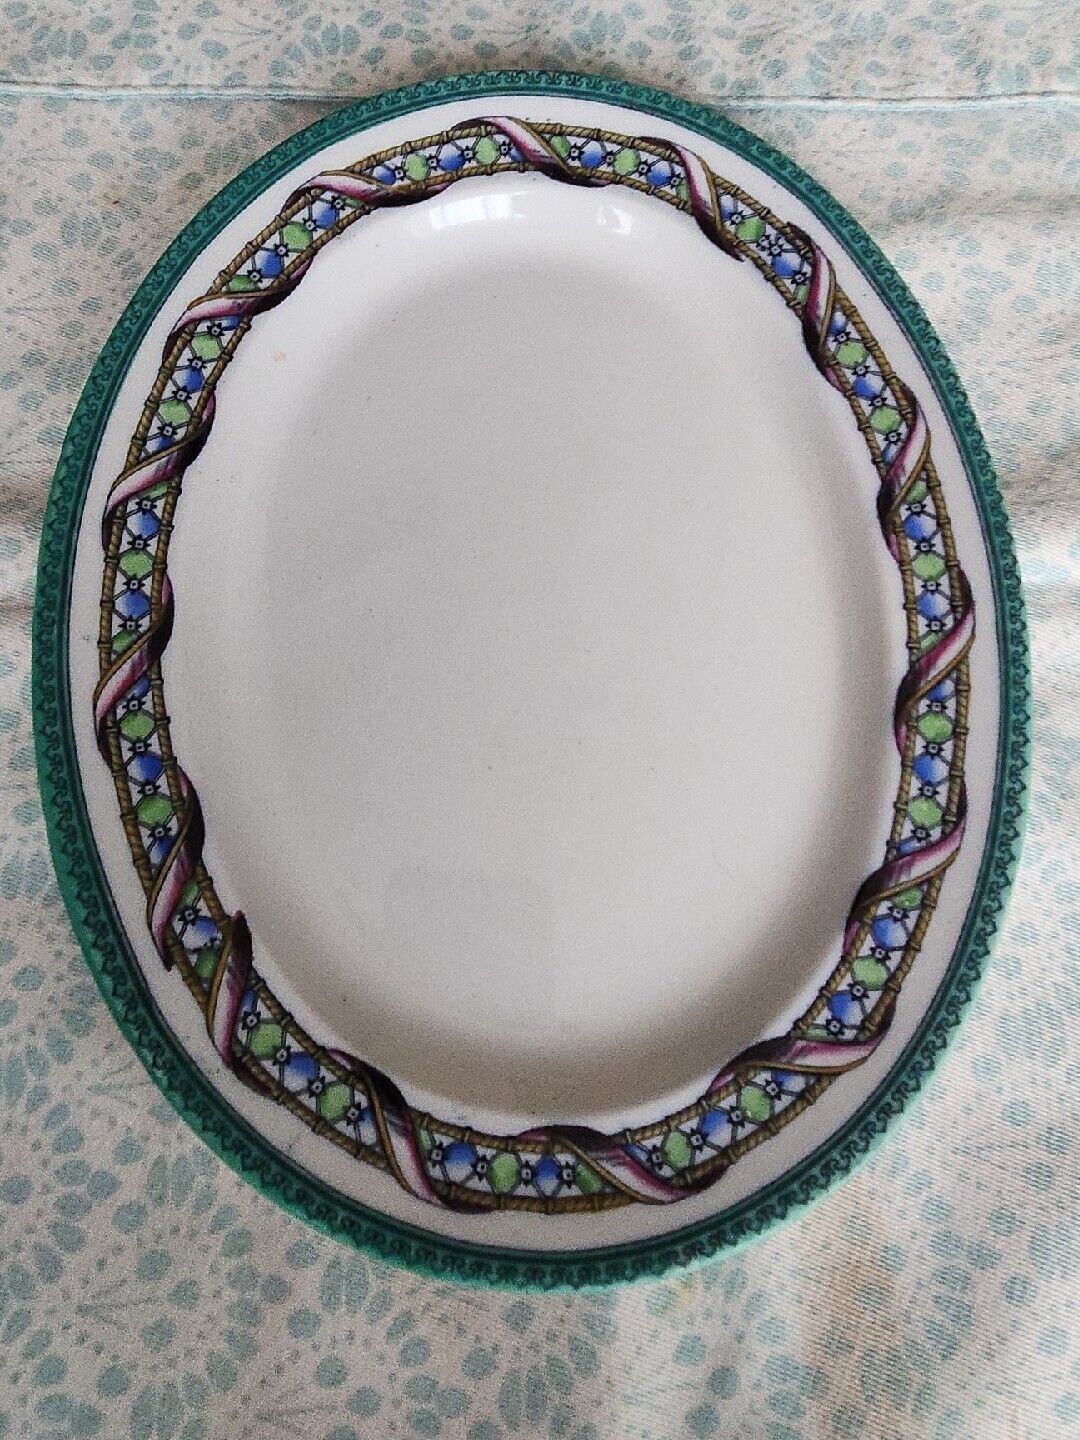 RALPH HAMMERSLEY Antique Porcelain Oval Plate RARE 1868 Mark bright greens